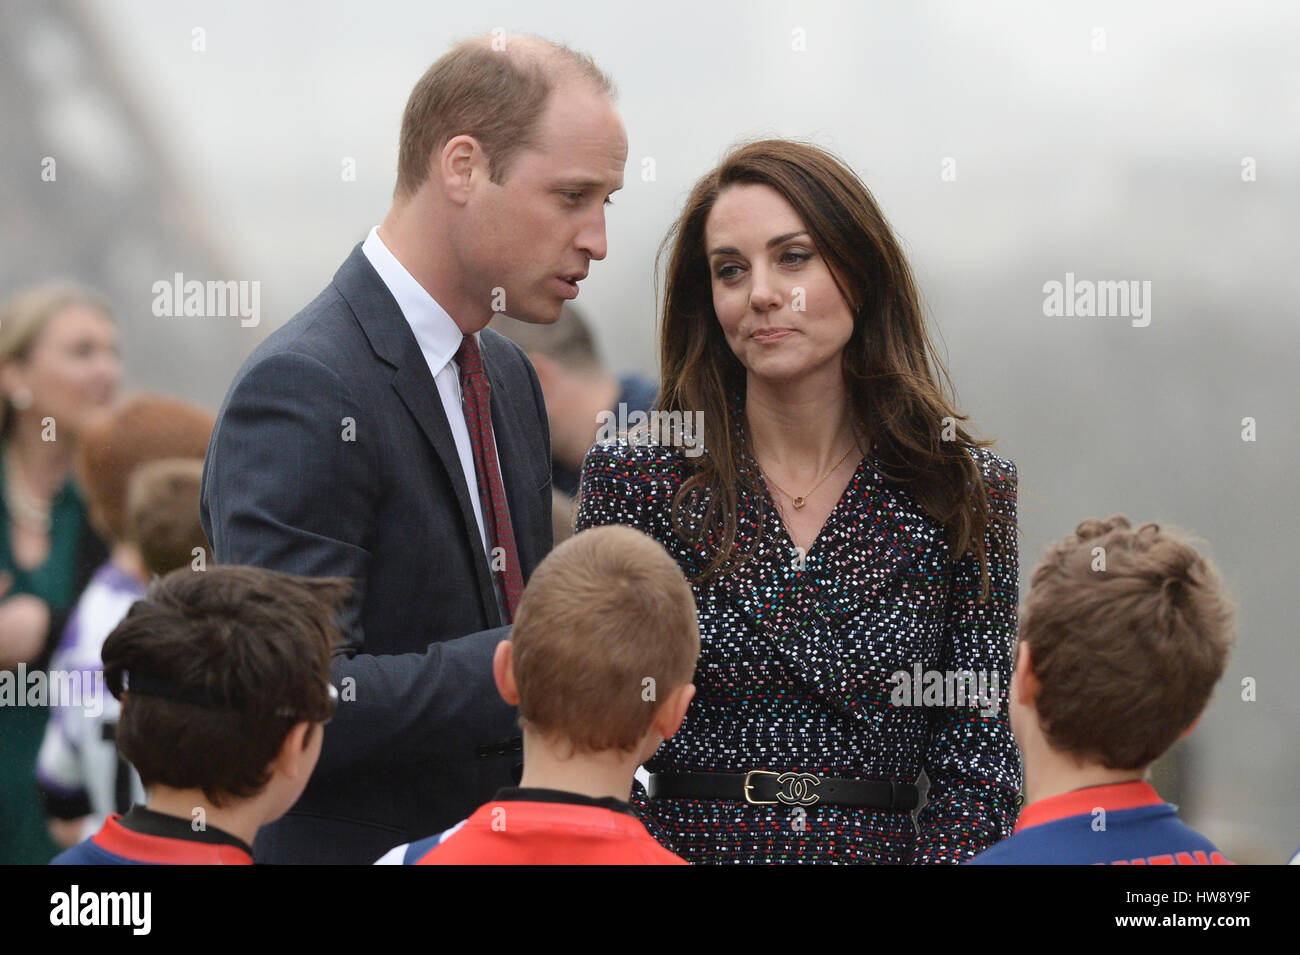 The Duke and Duchess of Cambridge at the Trocadero, where they attended a 'Les Voisins in Action' event highlighting the strong ties between the young people of France and the UK, during an official visit to Paris, France. Stock Photo